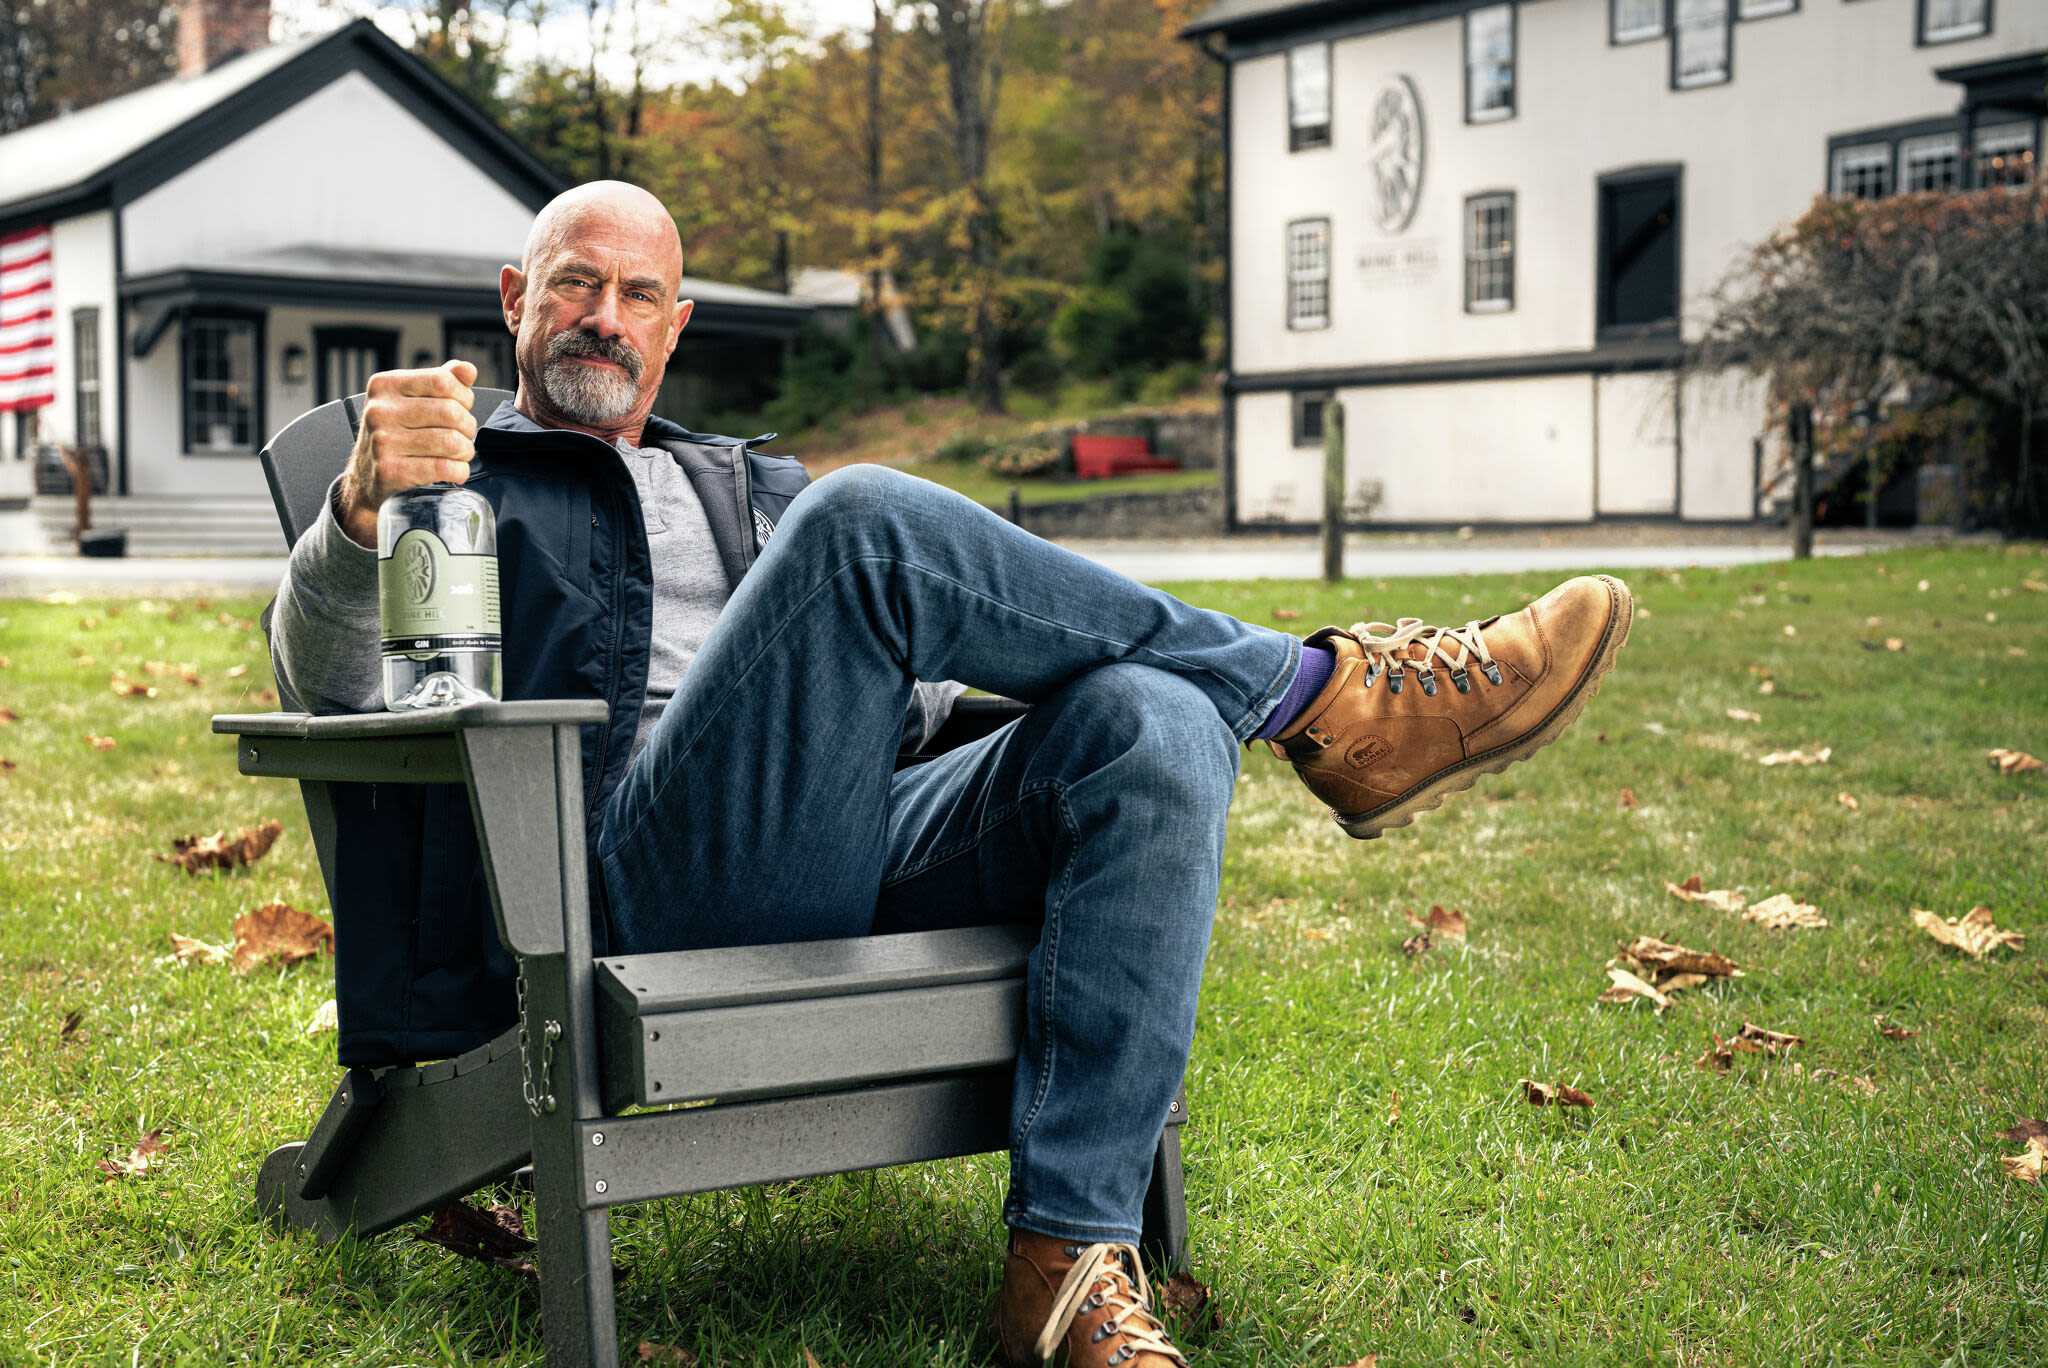 Chris Meloni of 'Law & Order' fame appears in a commercial for Roxbury's Mine Hill Distillery